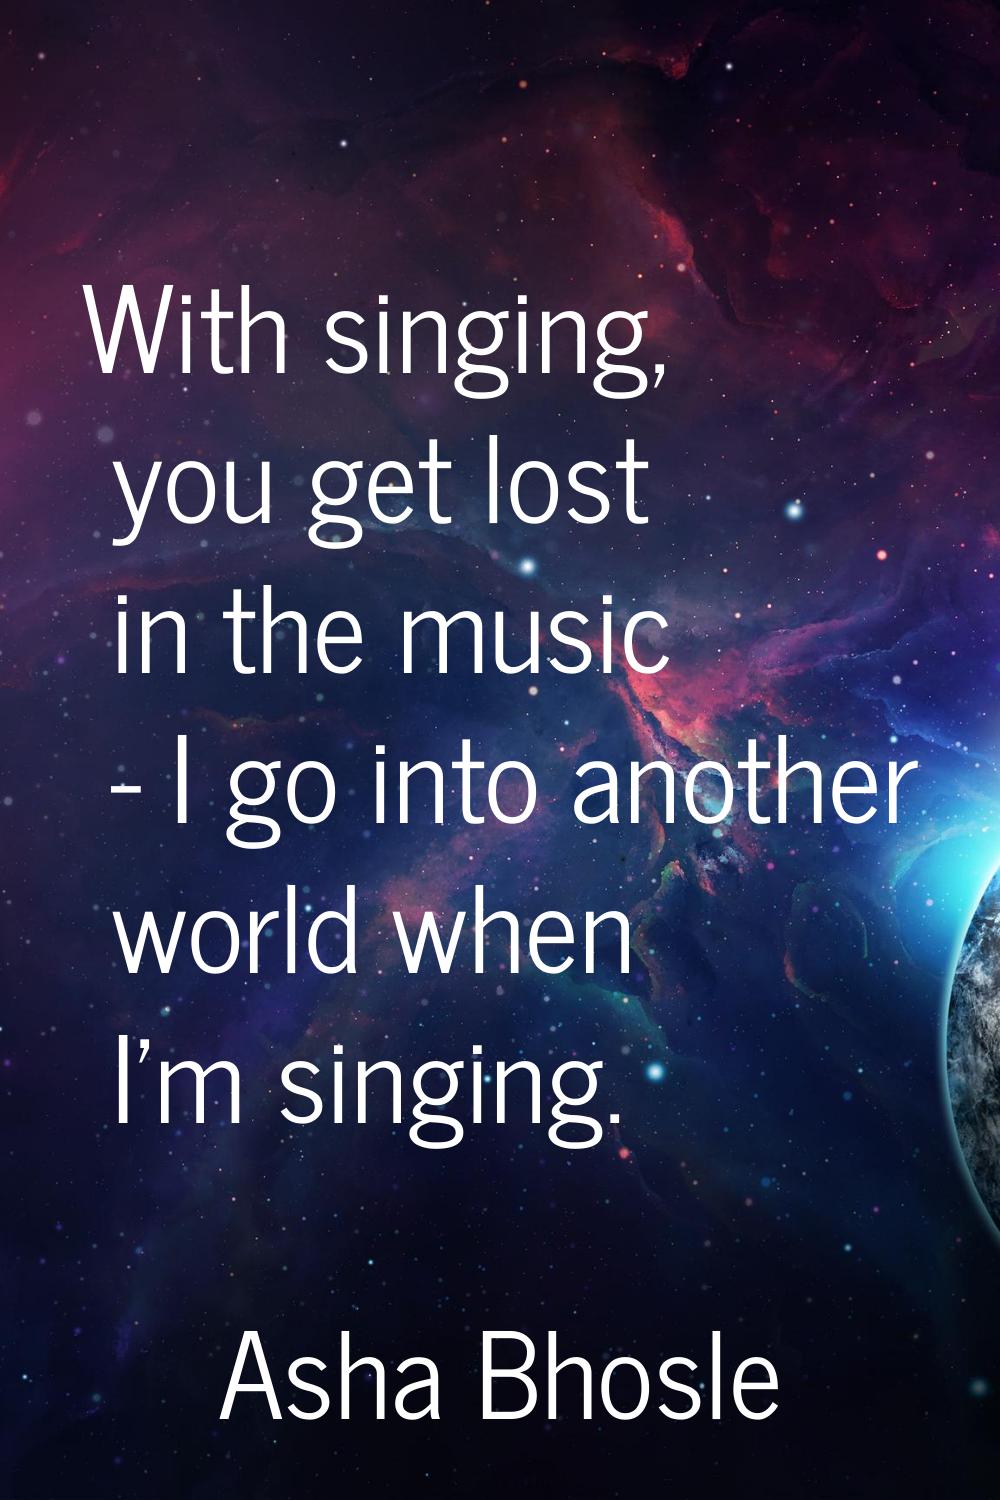 With singing, you get lost in the music - I go into another world when I'm singing.